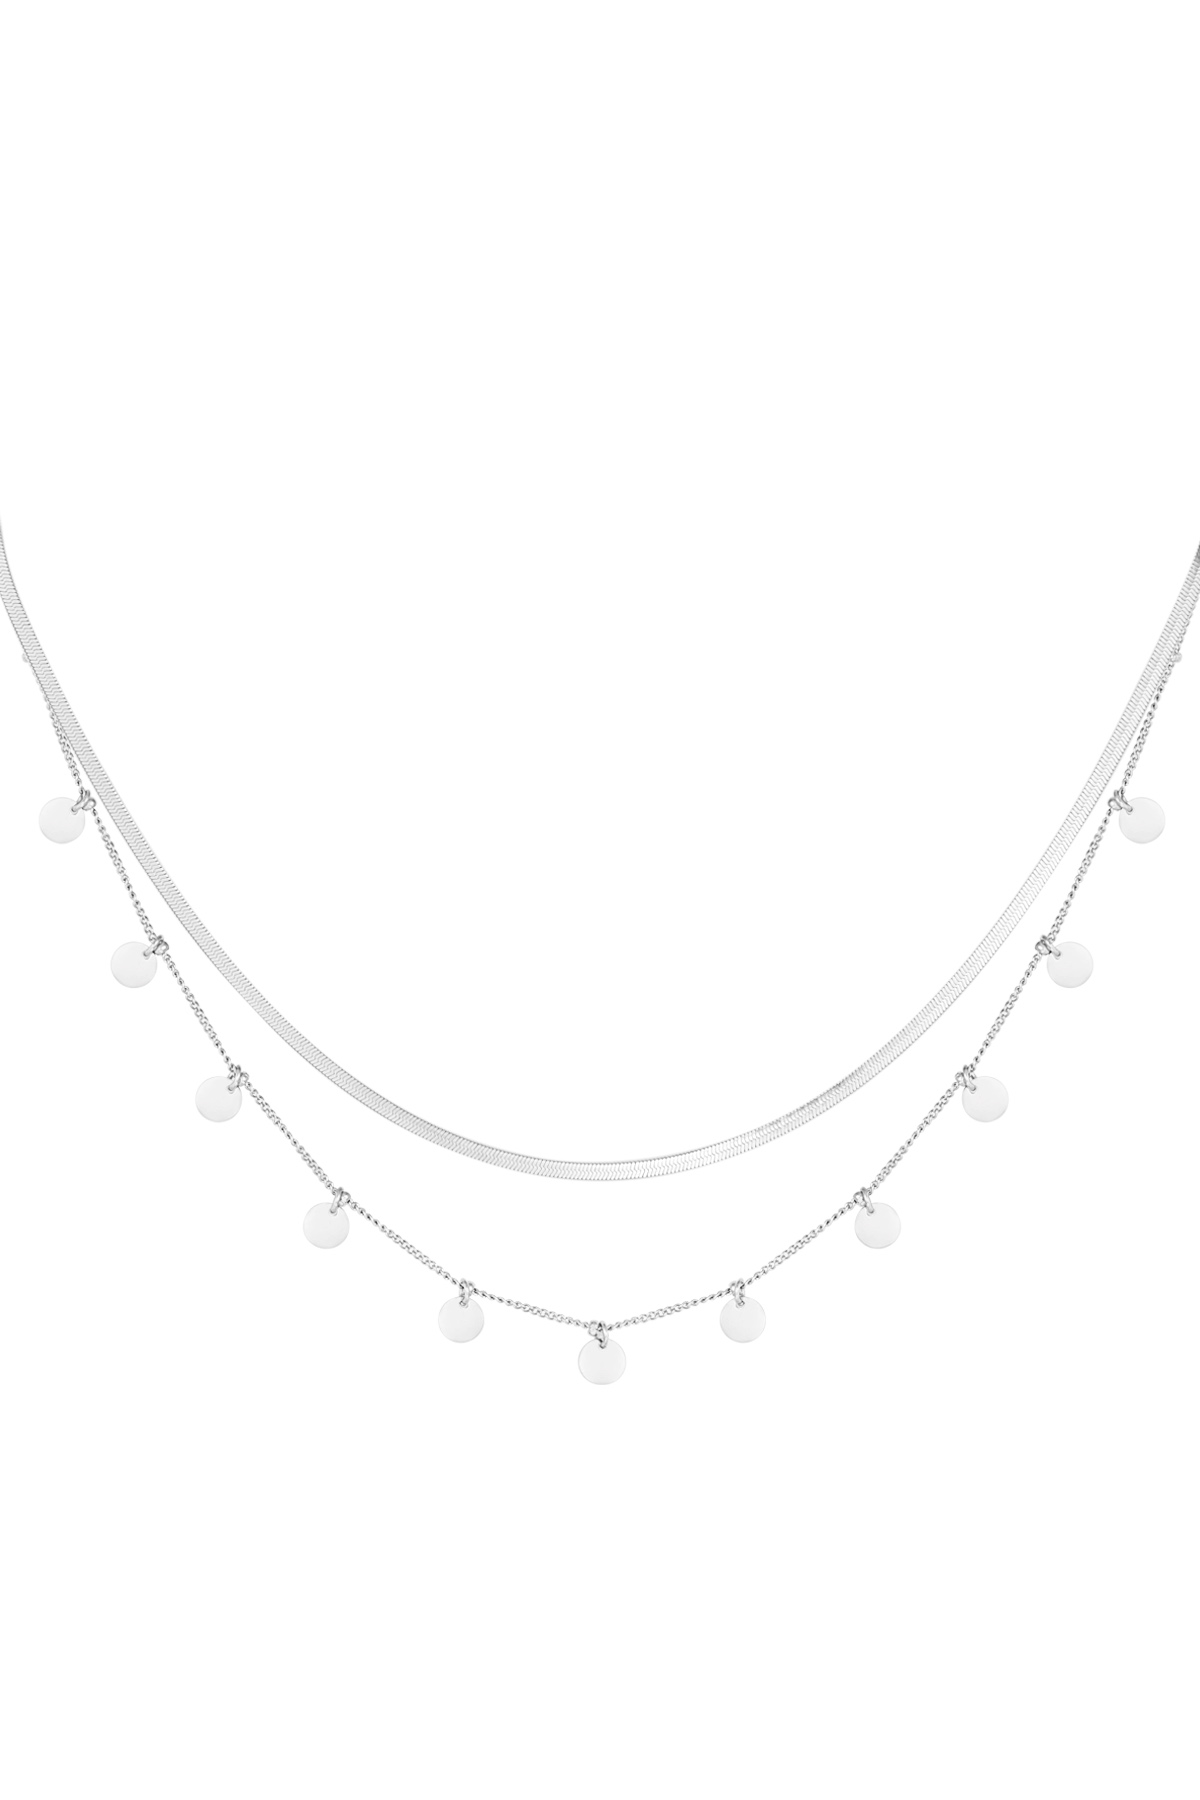 Necklace double layered circles - silver